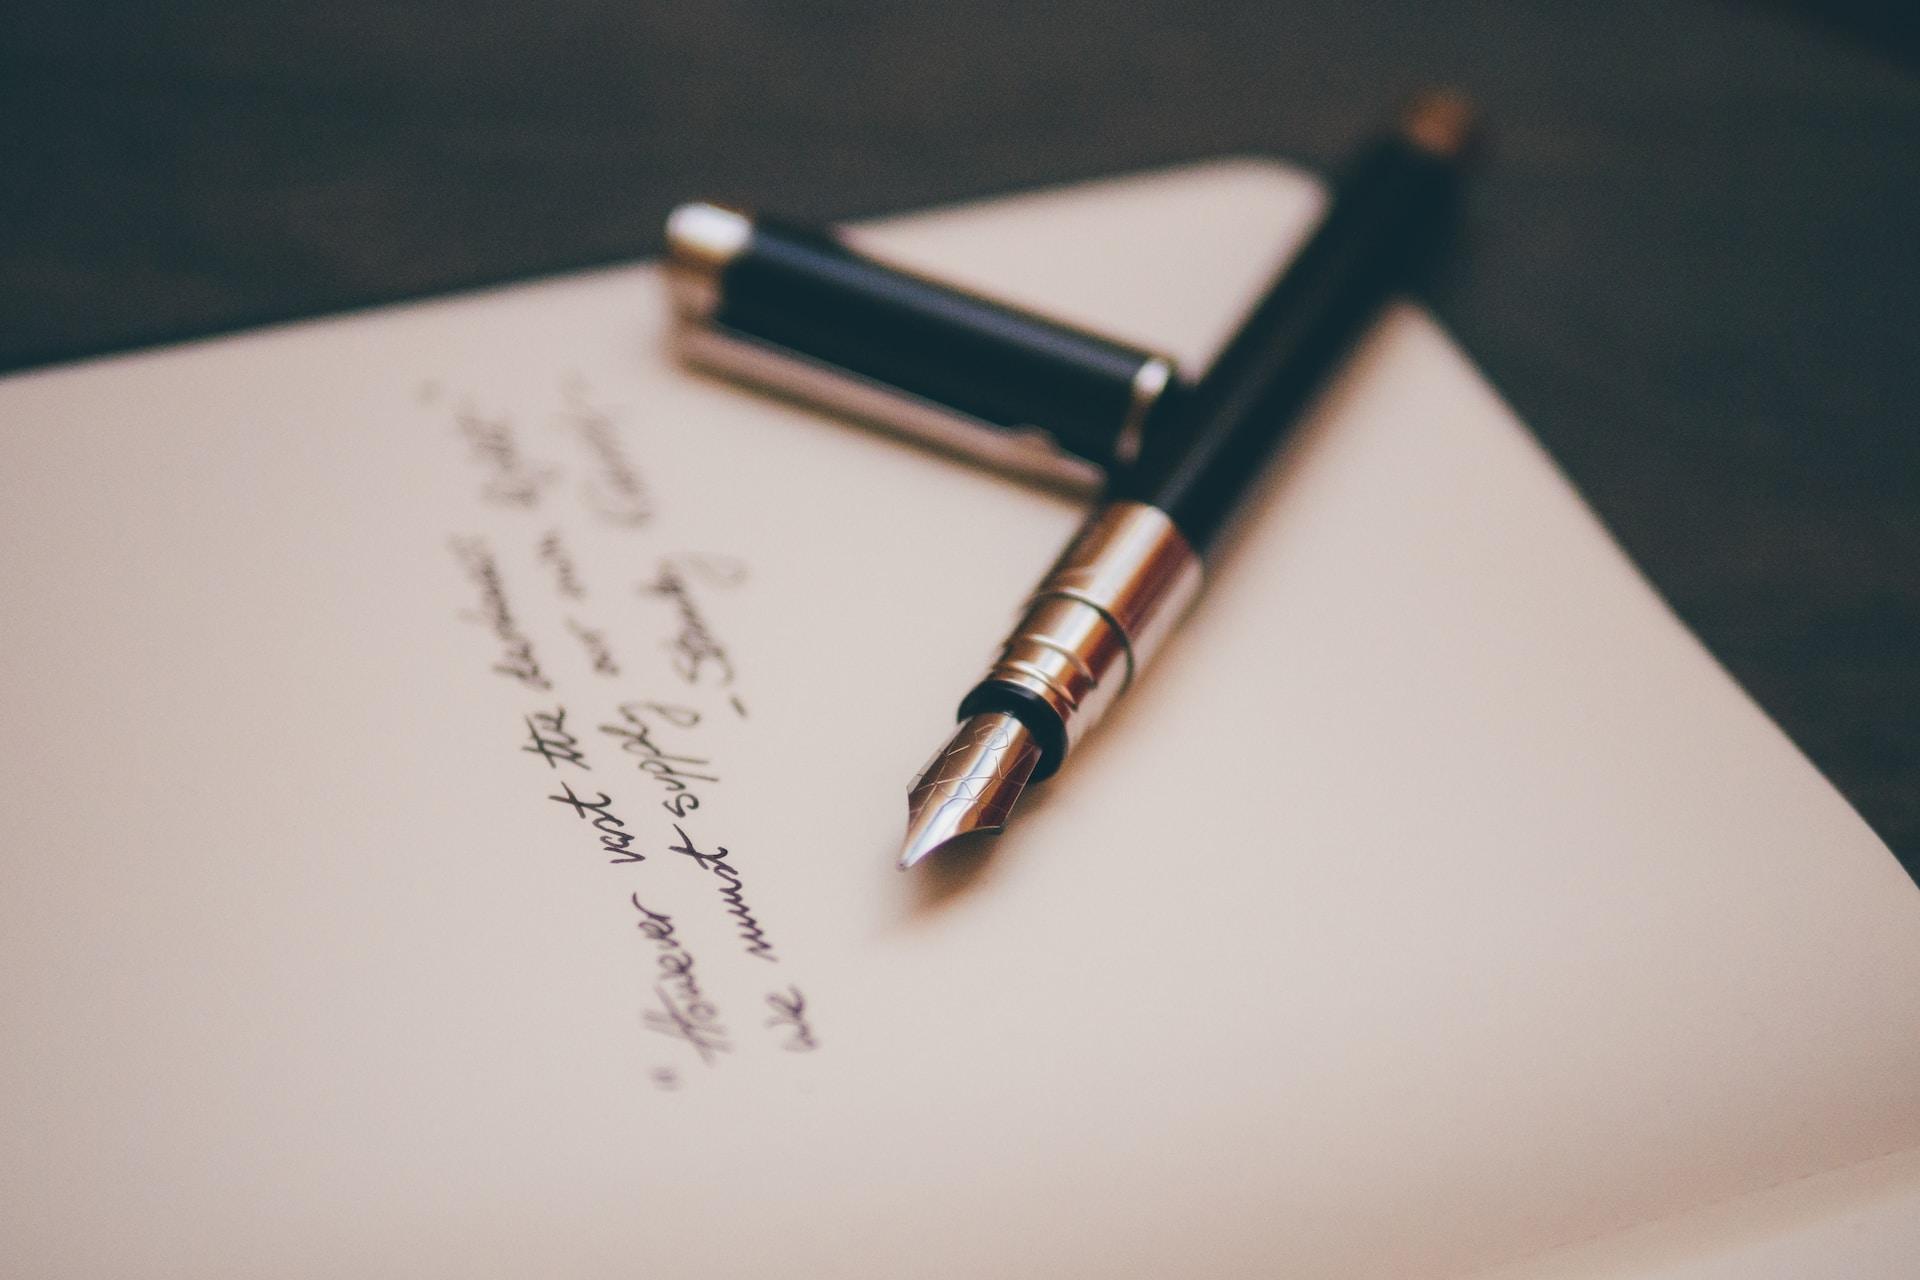 Calligraphy pen and pen lid on top of a notebook containing white pages and non-discernable black cursive writing on top of a dark-colored table.